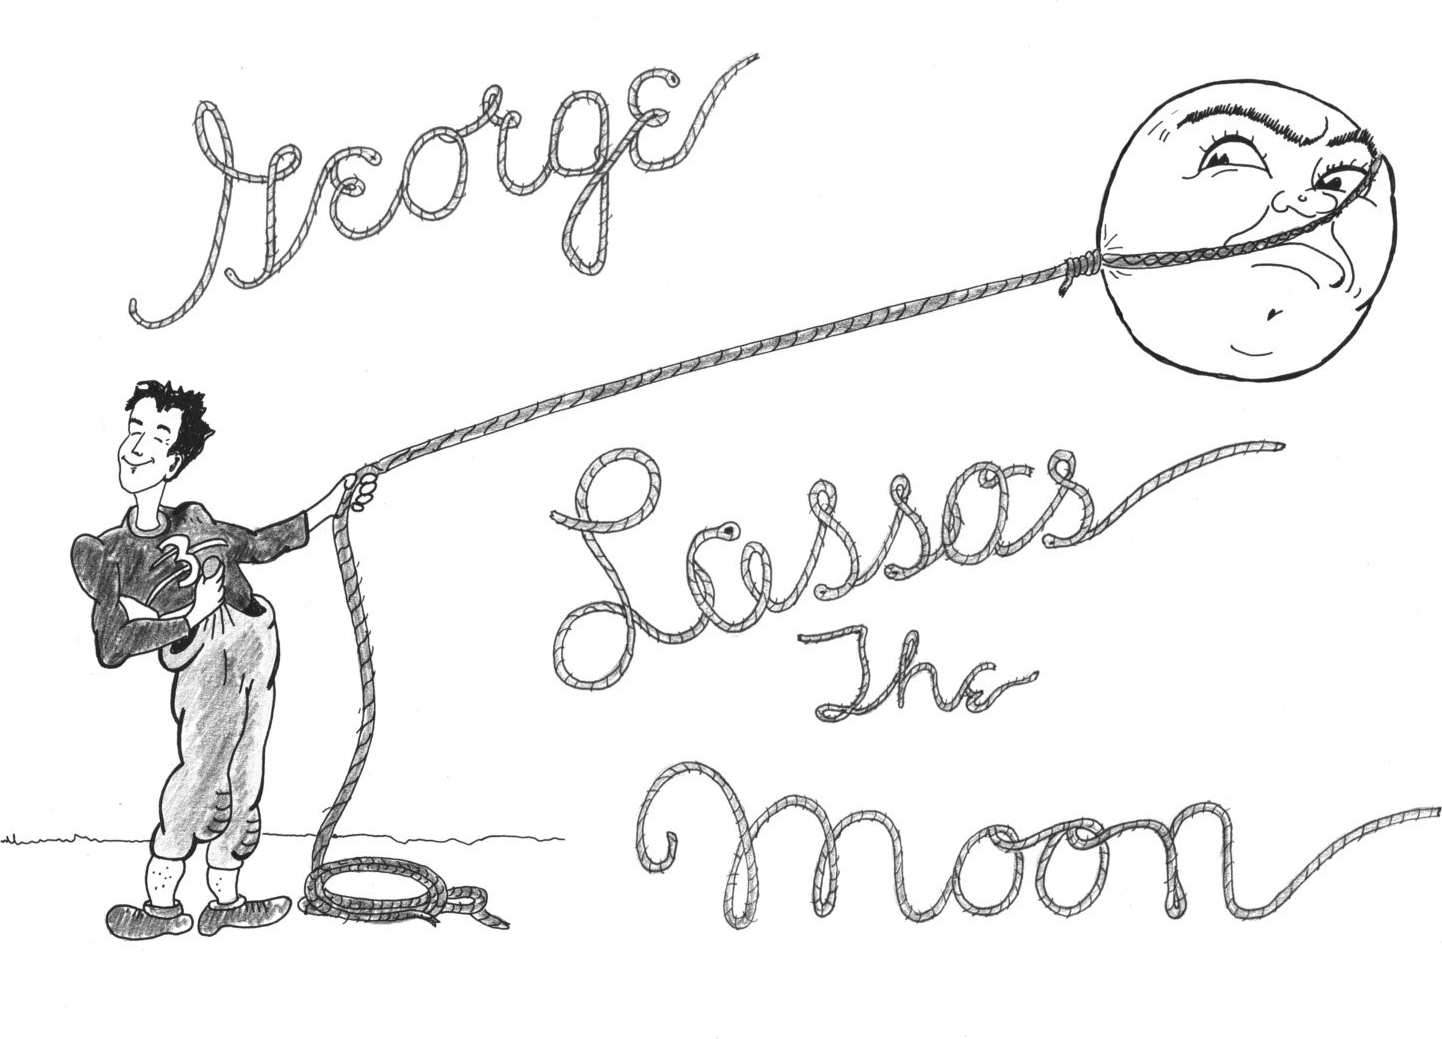 George lasso's the moon- It's a wonderful life.